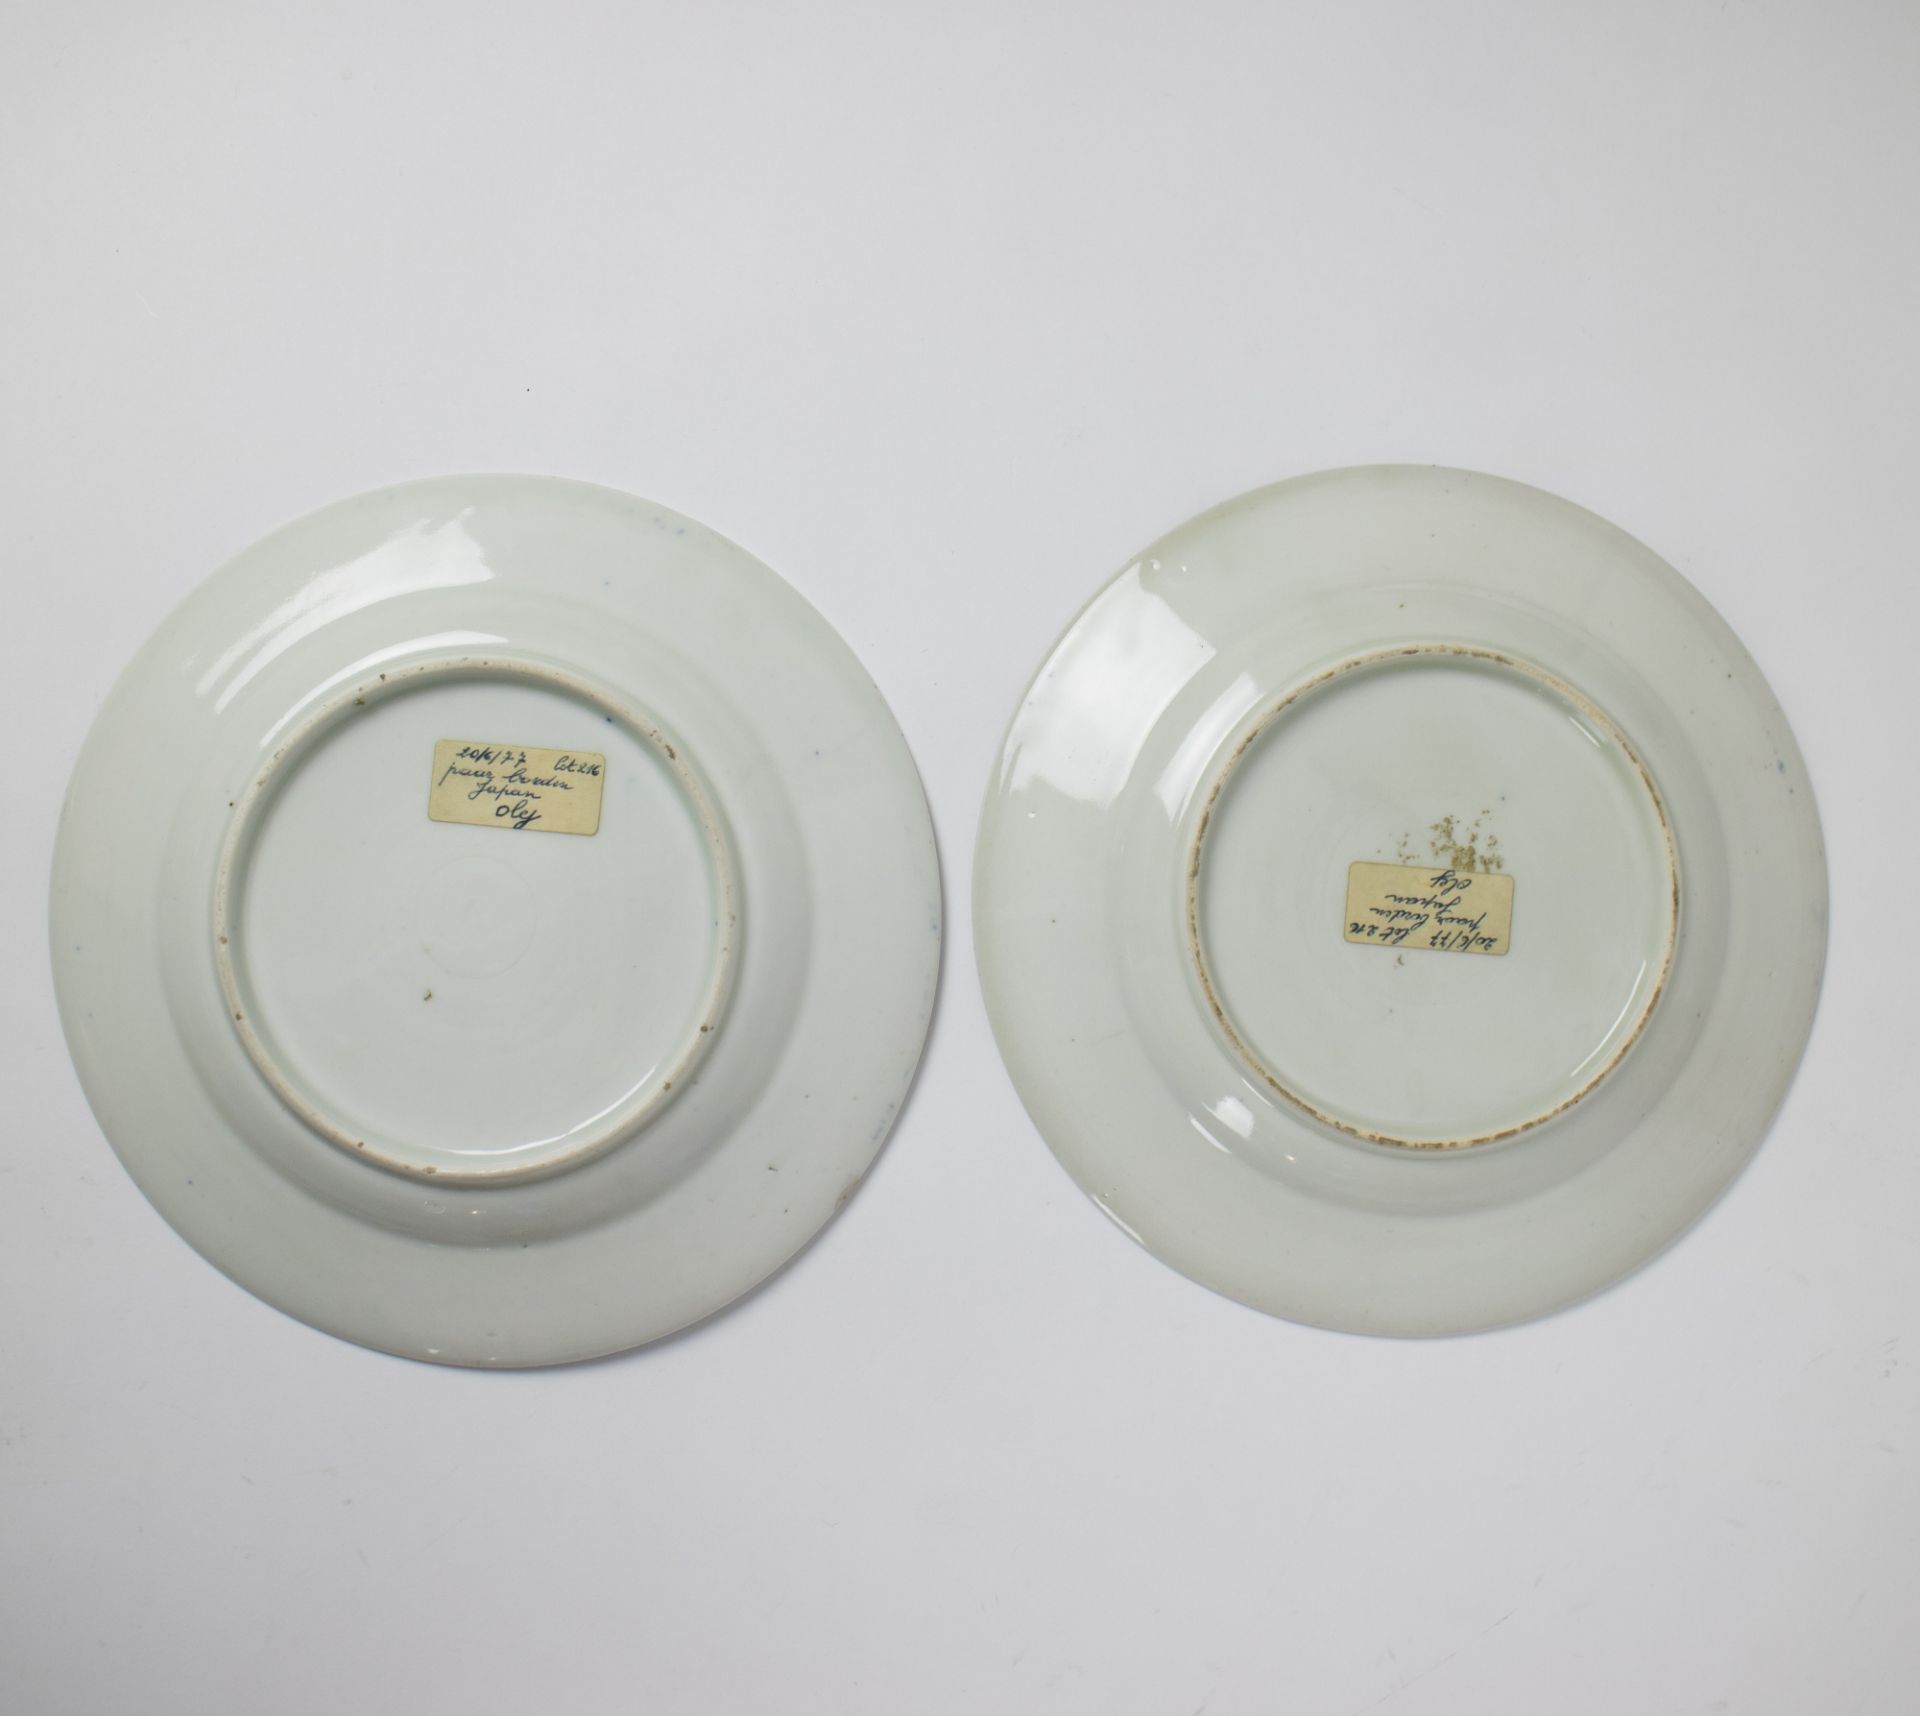 A collection of 4 Chinese plates 18th century and 2 Japanese plates - Image 7 of 7